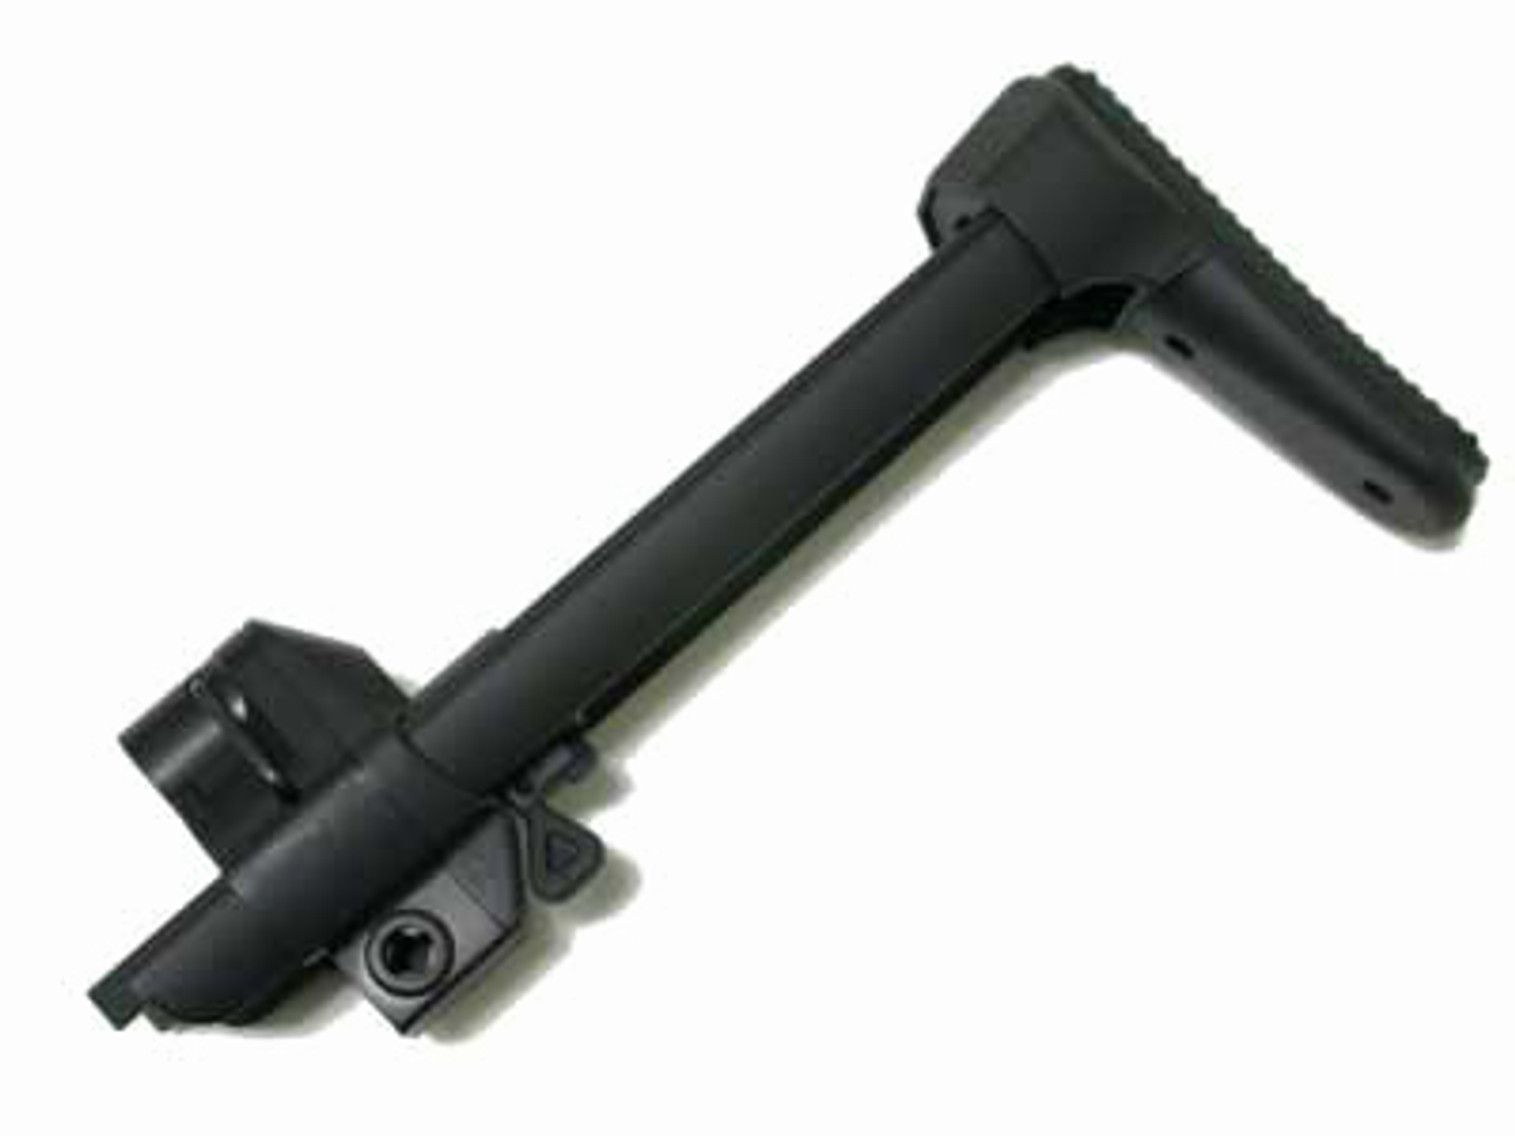 ICS Reinforced Retractable Stock for MP5  Mod5 Series Airsoft AEG